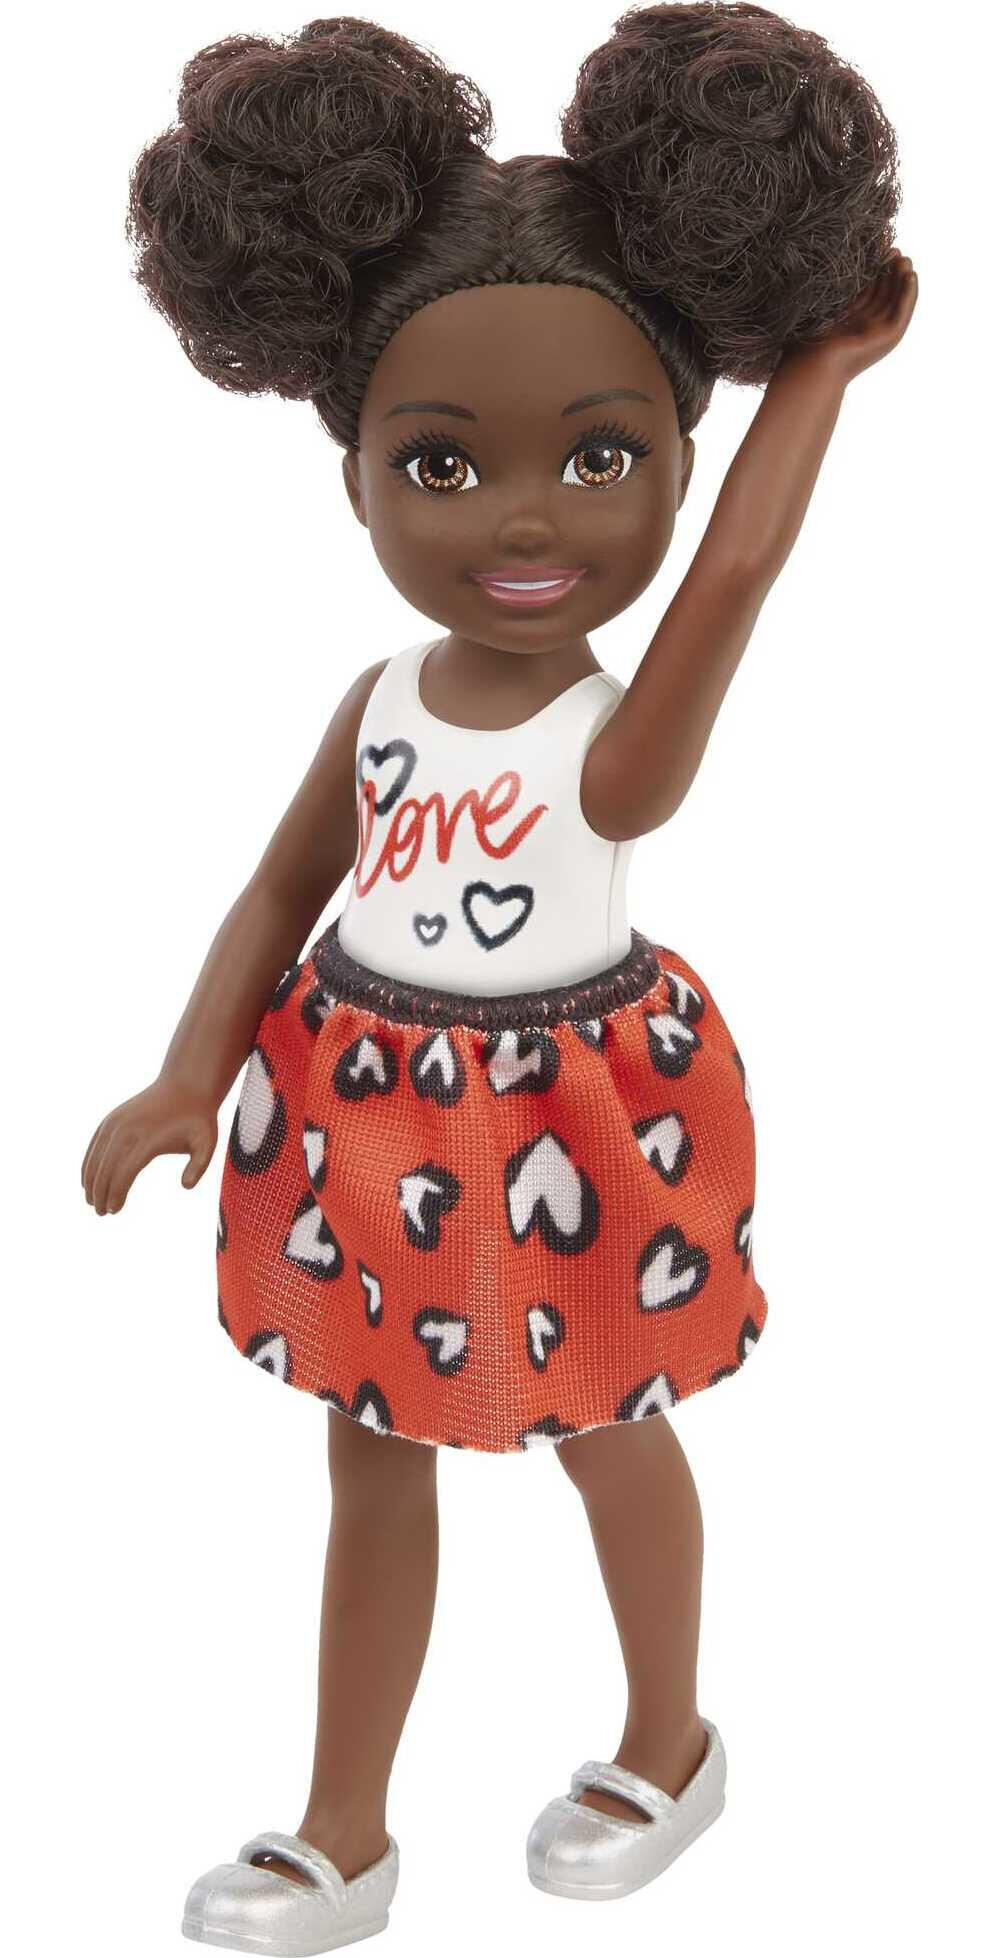 Barbie Chelsea Small Doll with Black Hair in Afro Puffs Wearing Removable Skirt & Silvery Shoes - image 1 of 6